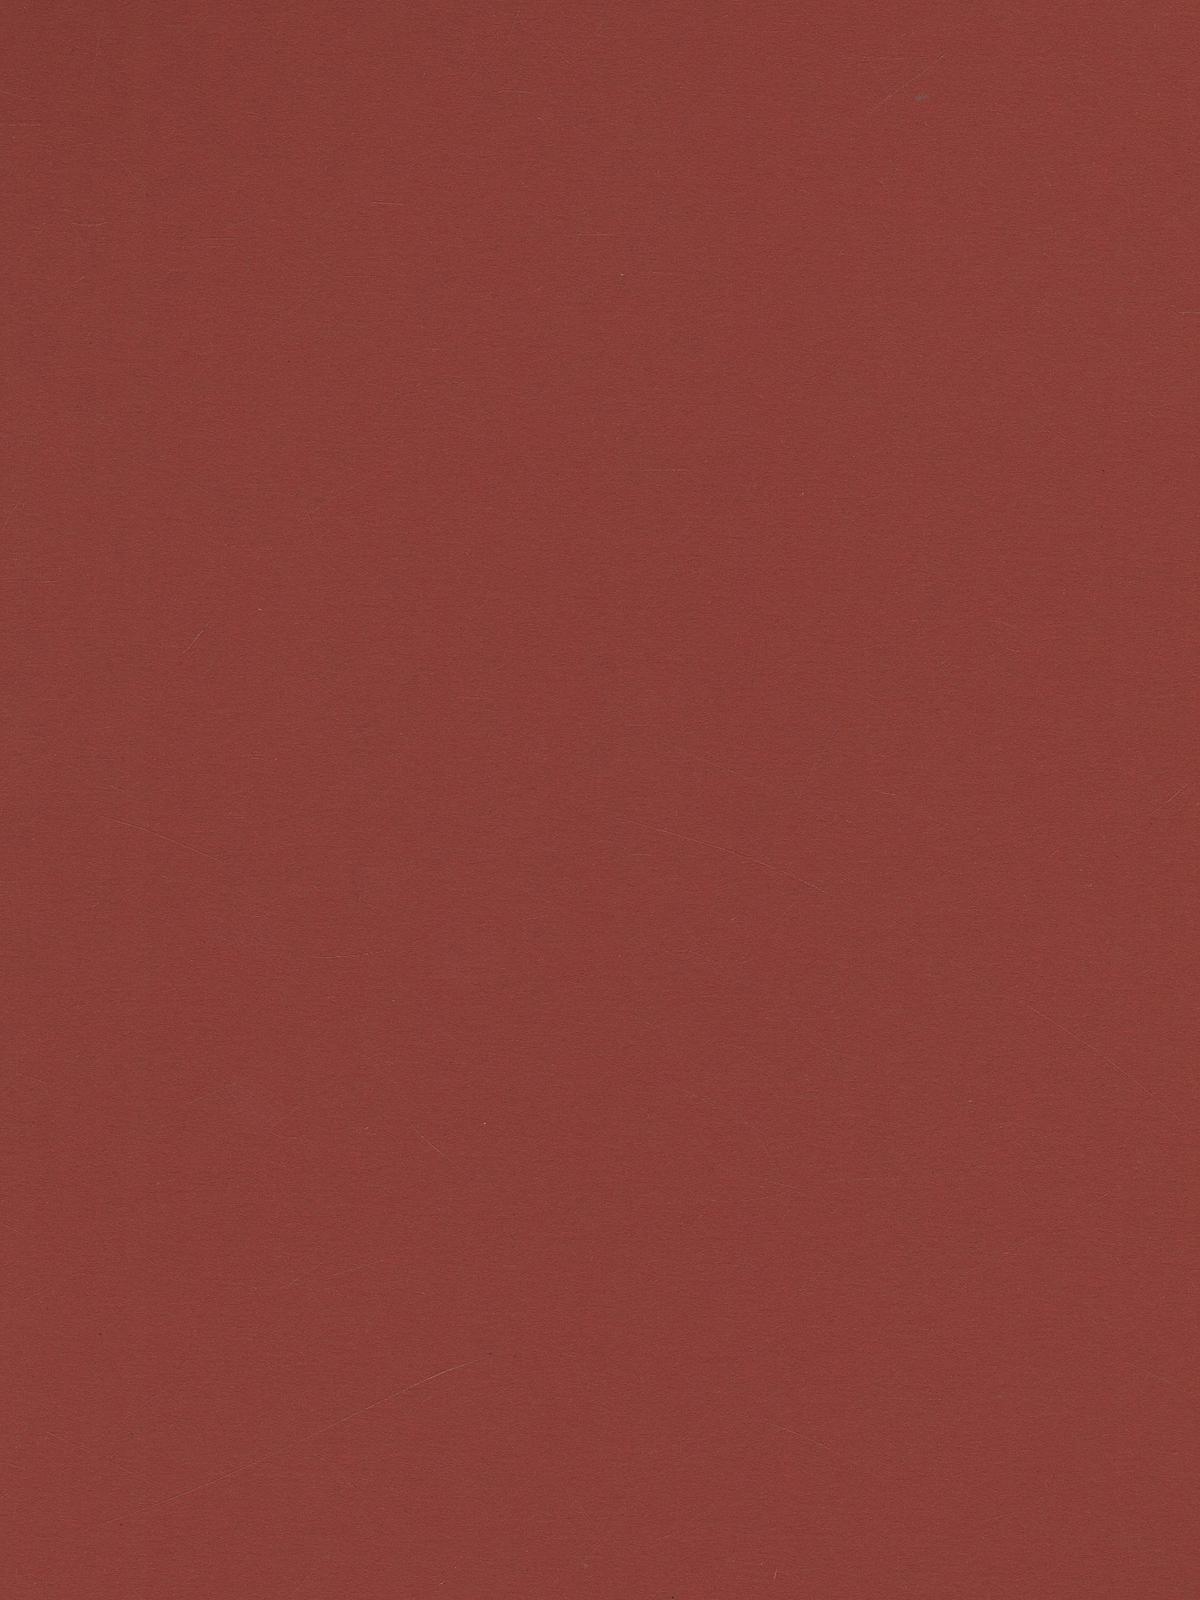 Art Card Red Brown 8.5 In. X 11 In.